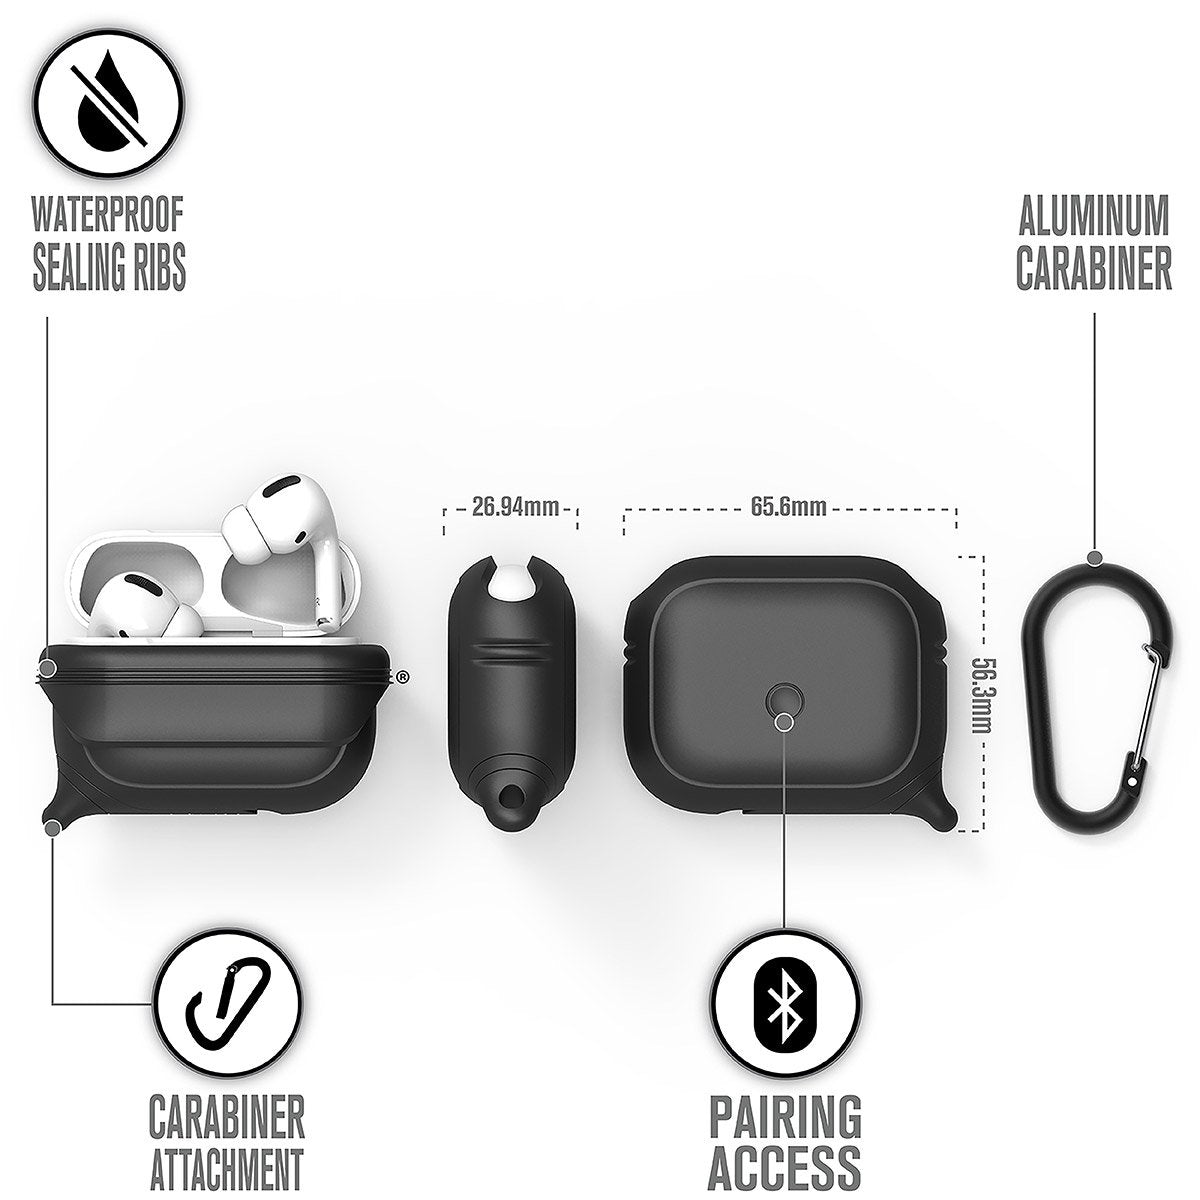 CATAPDPROBLK | catalyst airpods pro gen 2 1 waterproof case carabiner stealth black different views showing the sealing ribs carabiner attachment loop and pairing access text reads waterproof sealing ribs aluminum carabiner carabiner attachment pairing access